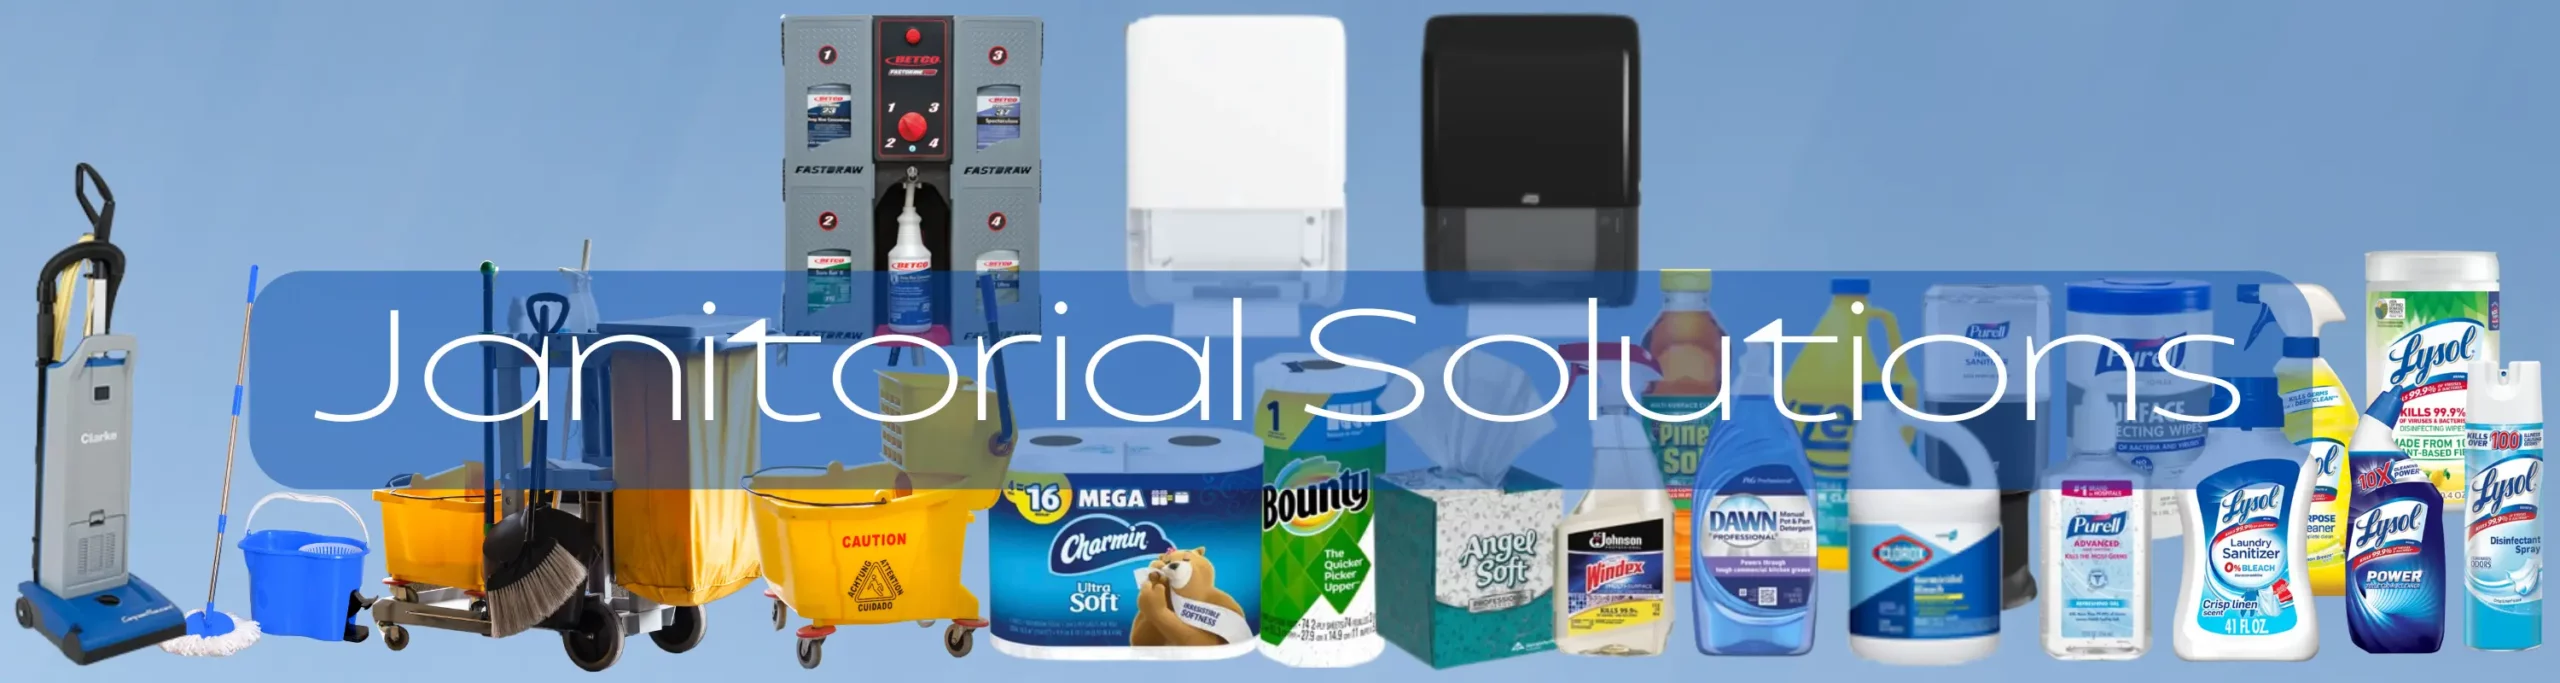 Janitorial Solutions Banner (1)